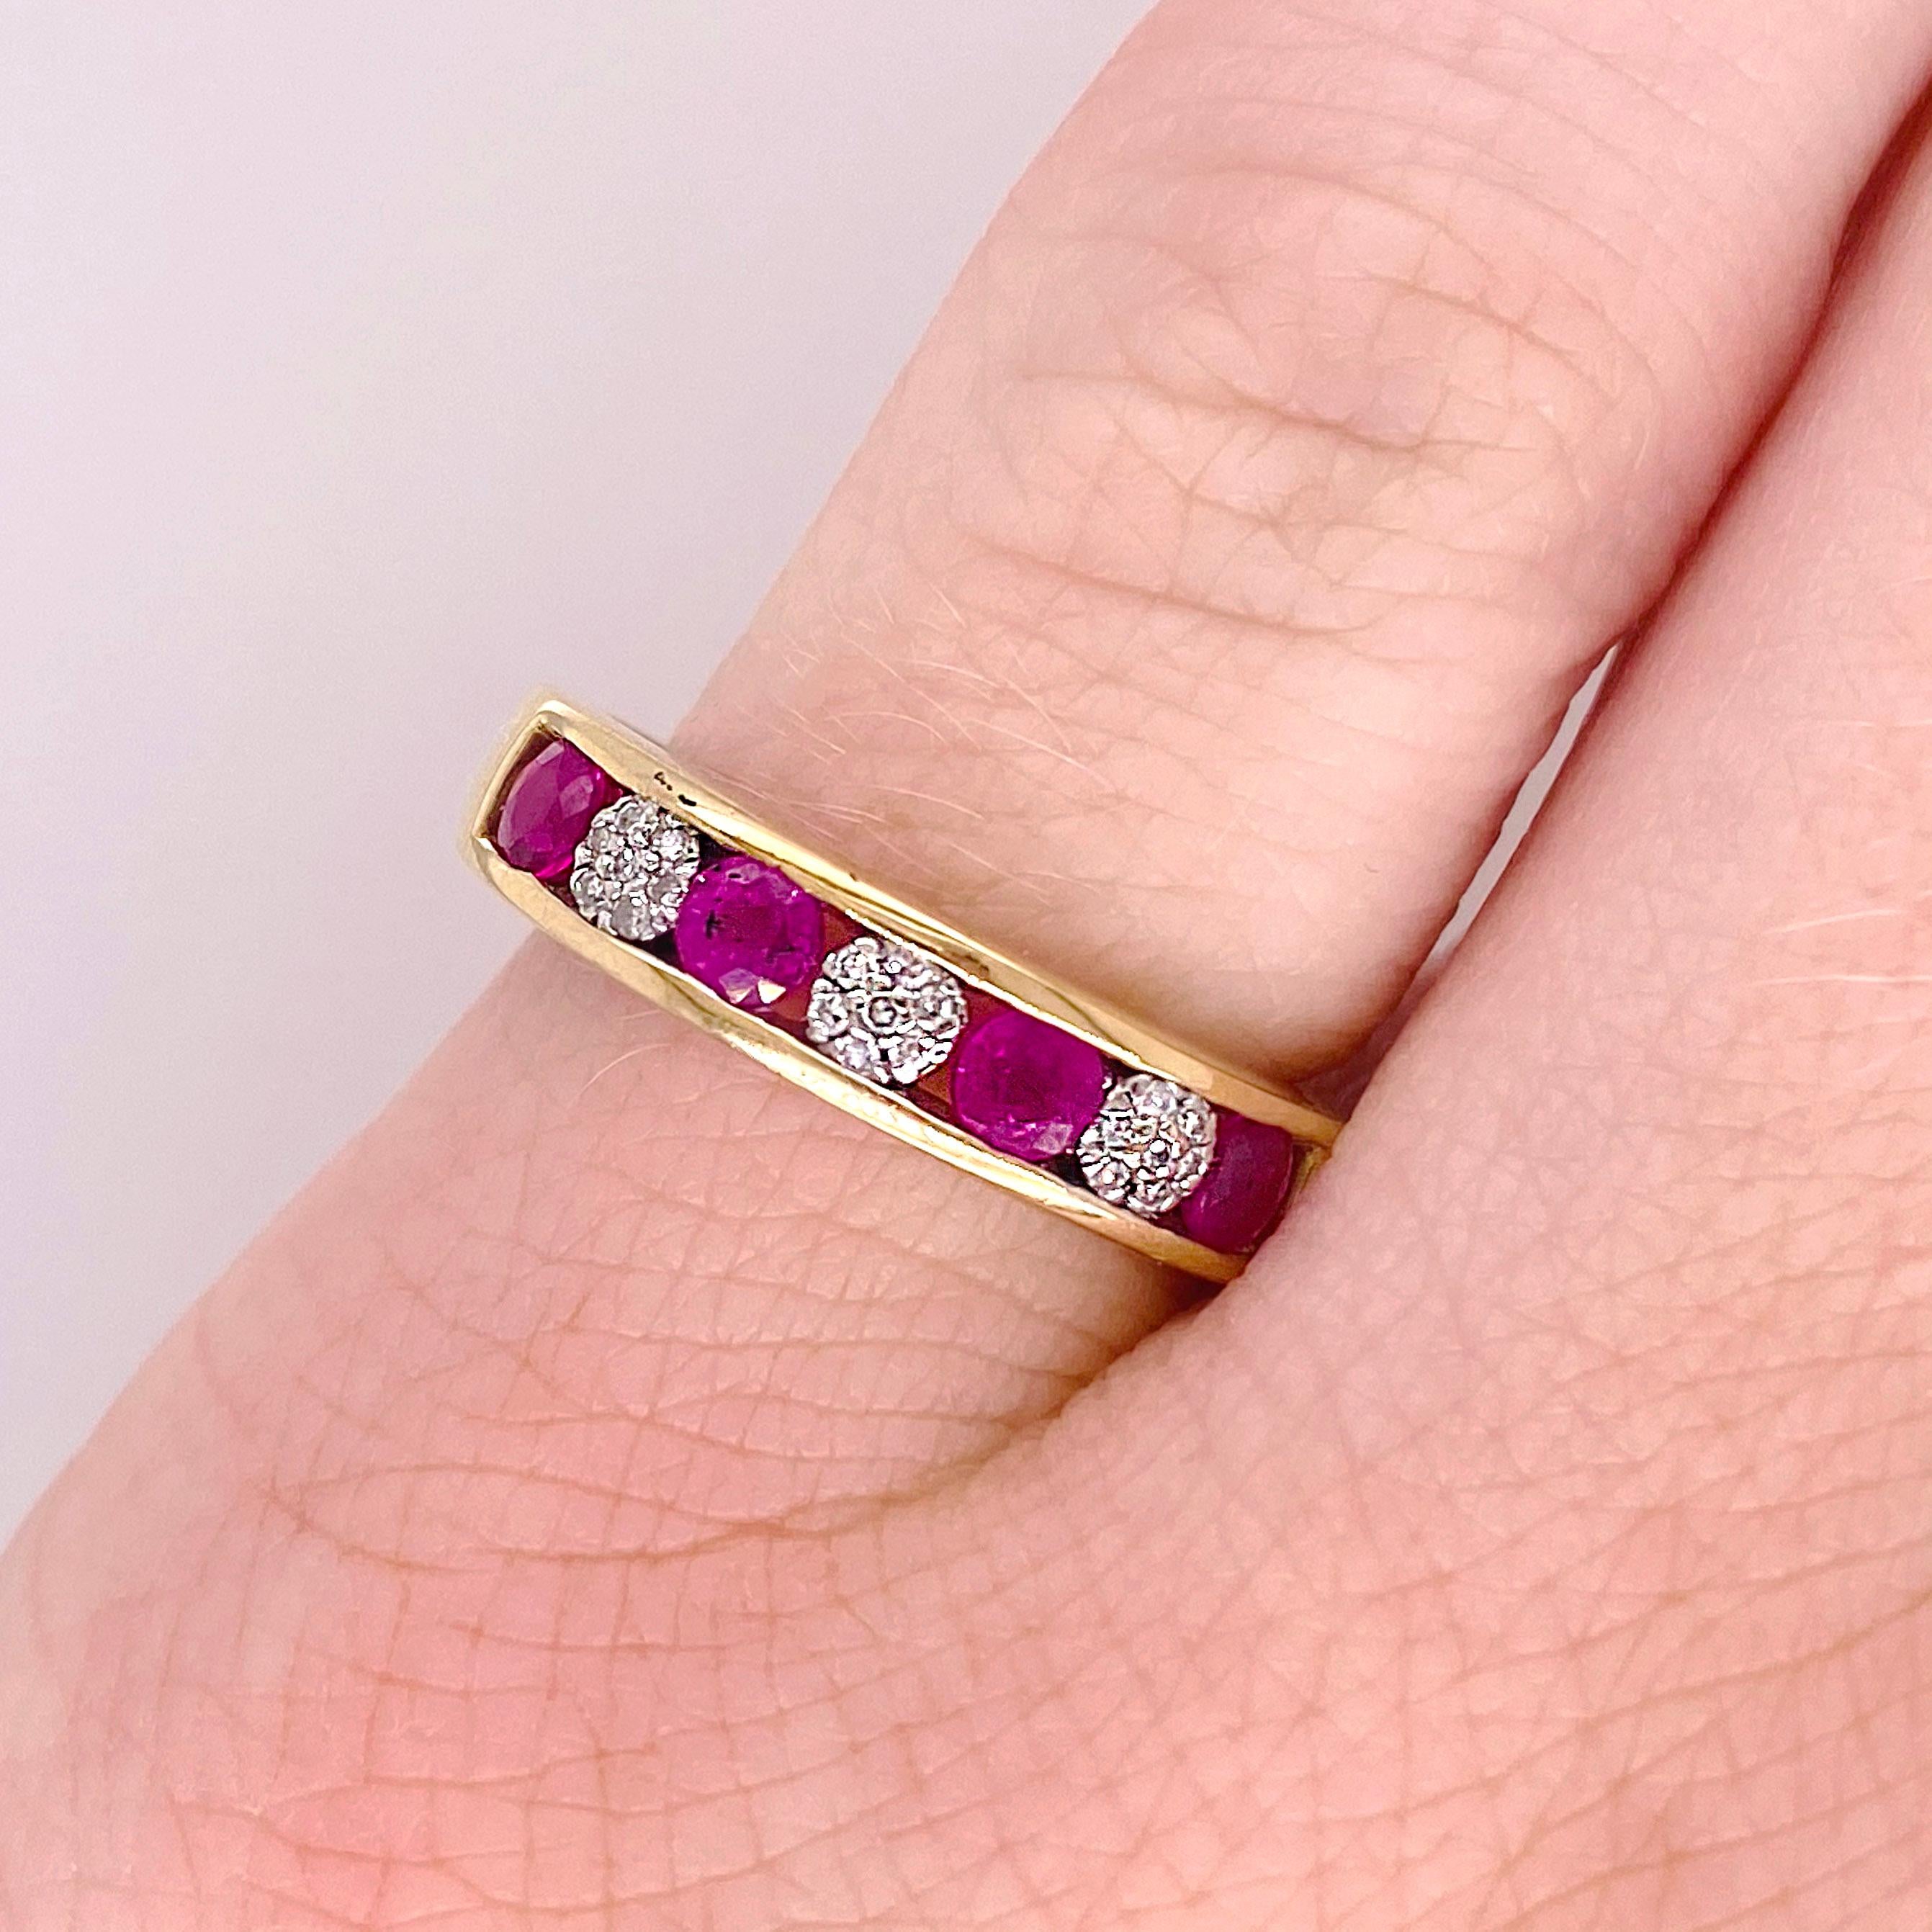 The details for this beautiful ring are listed below:
Quantity Available: 2
Metal Quality: 14K Yellow Gold
Diamond Number: 21
Diamond Total Weight: .07 carats
Diamond Clarity: SI2 (excellent, eye clean)
Diamond Color: G (excellent, near